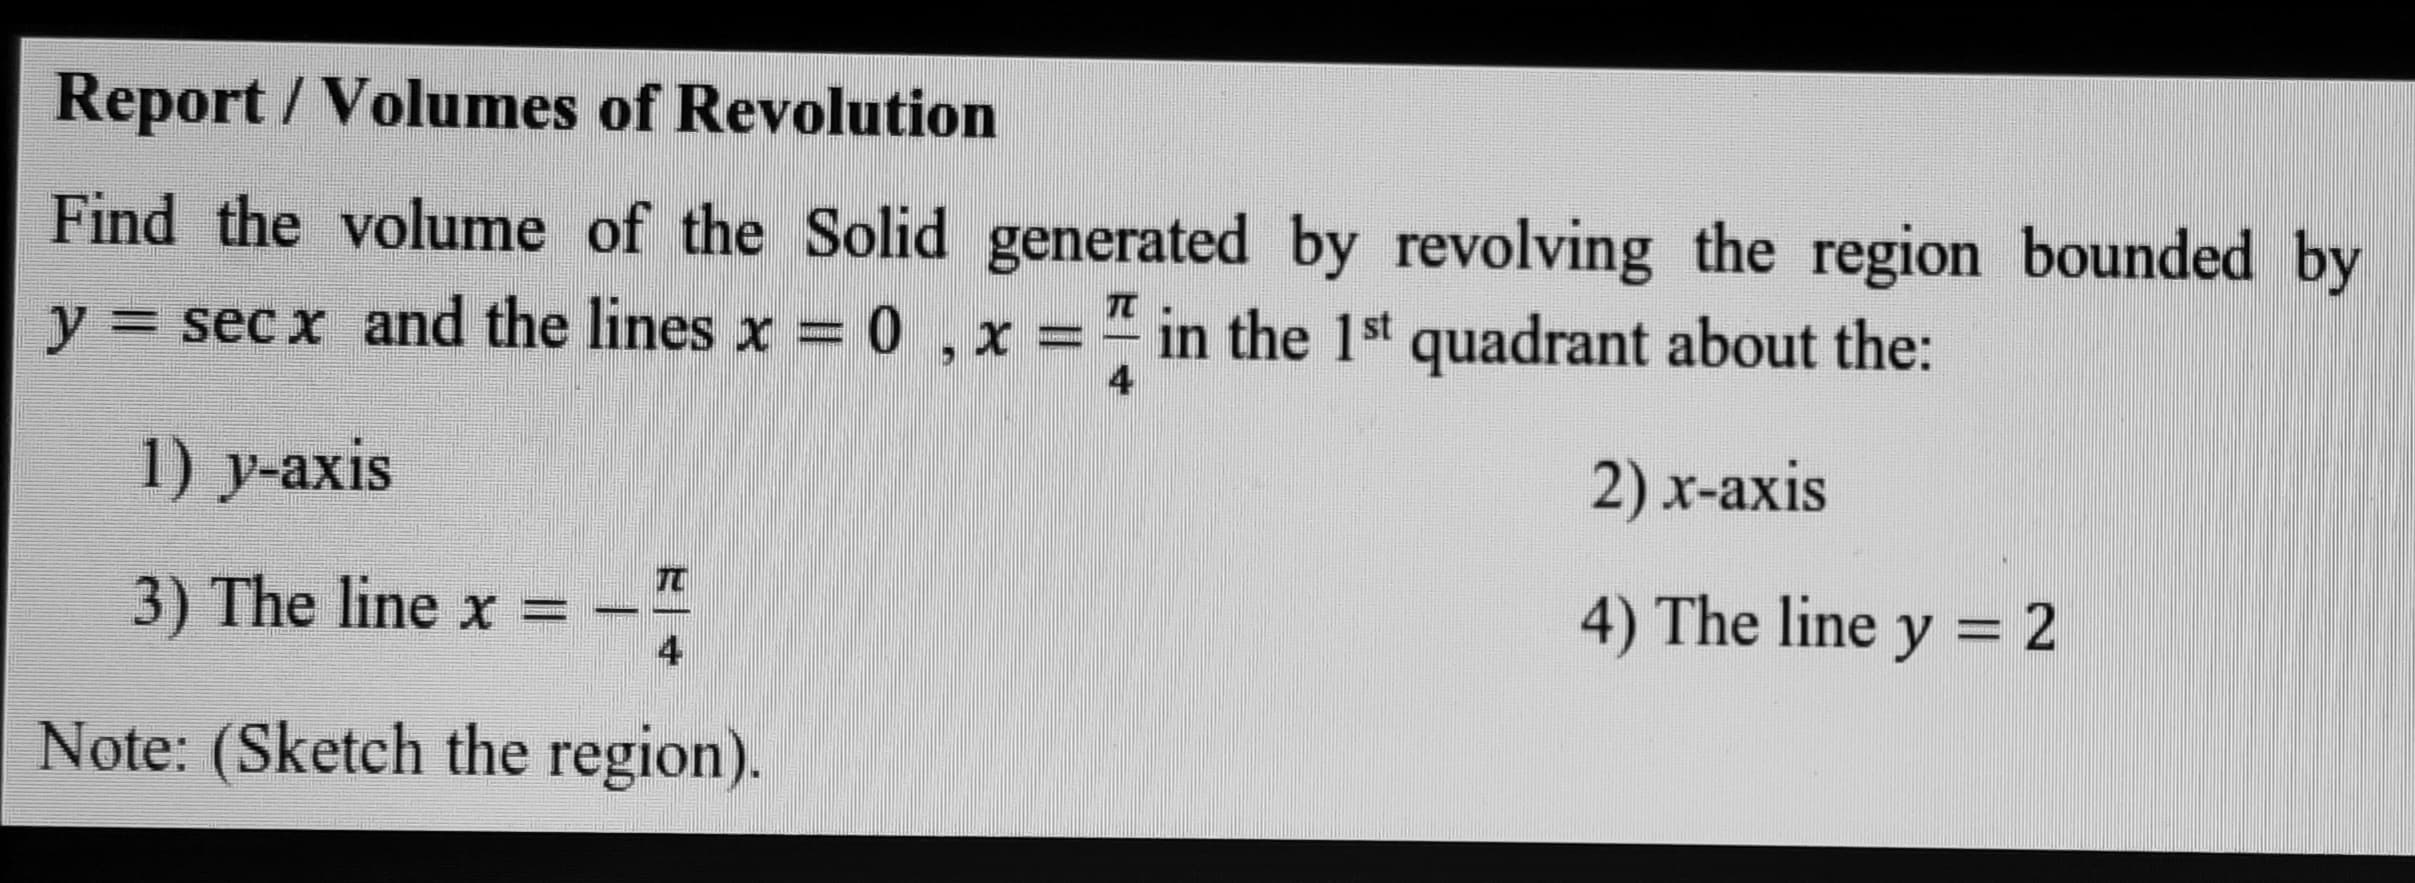 Find the volume of the Solid generated by revolving the region bounded by
y = sec x and the lines x = 0 ,x =" in the 1st quadrant about the:
TC
4
1) y-axis
2) x-axis
3) The line x =
4) The line y = 2
